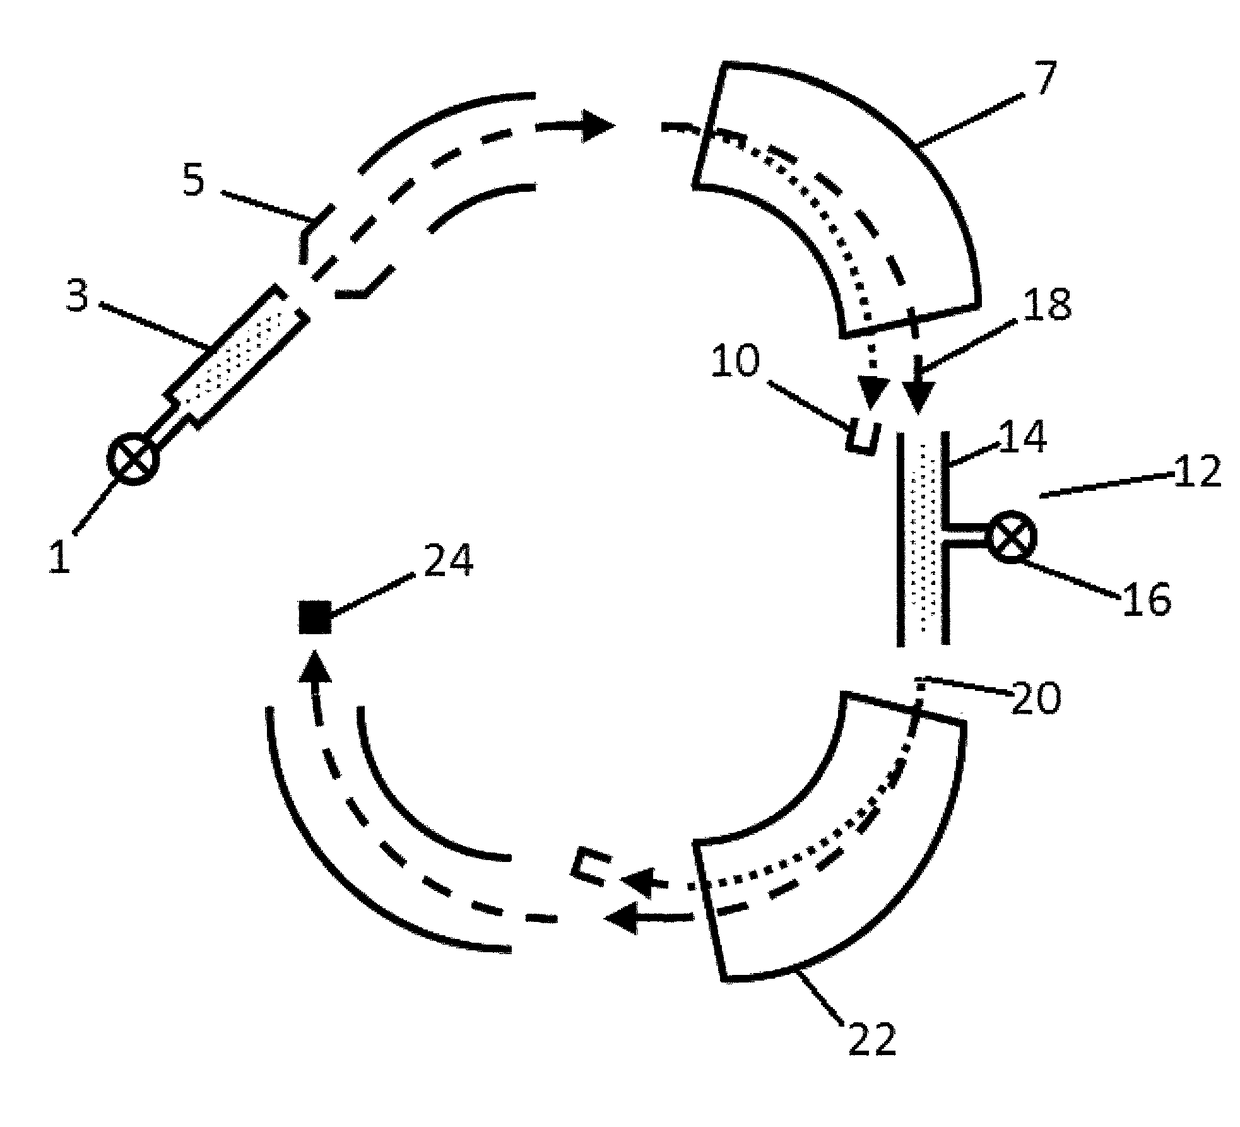 Methods and systems of treating a particle beam and performing mass spectroscopy